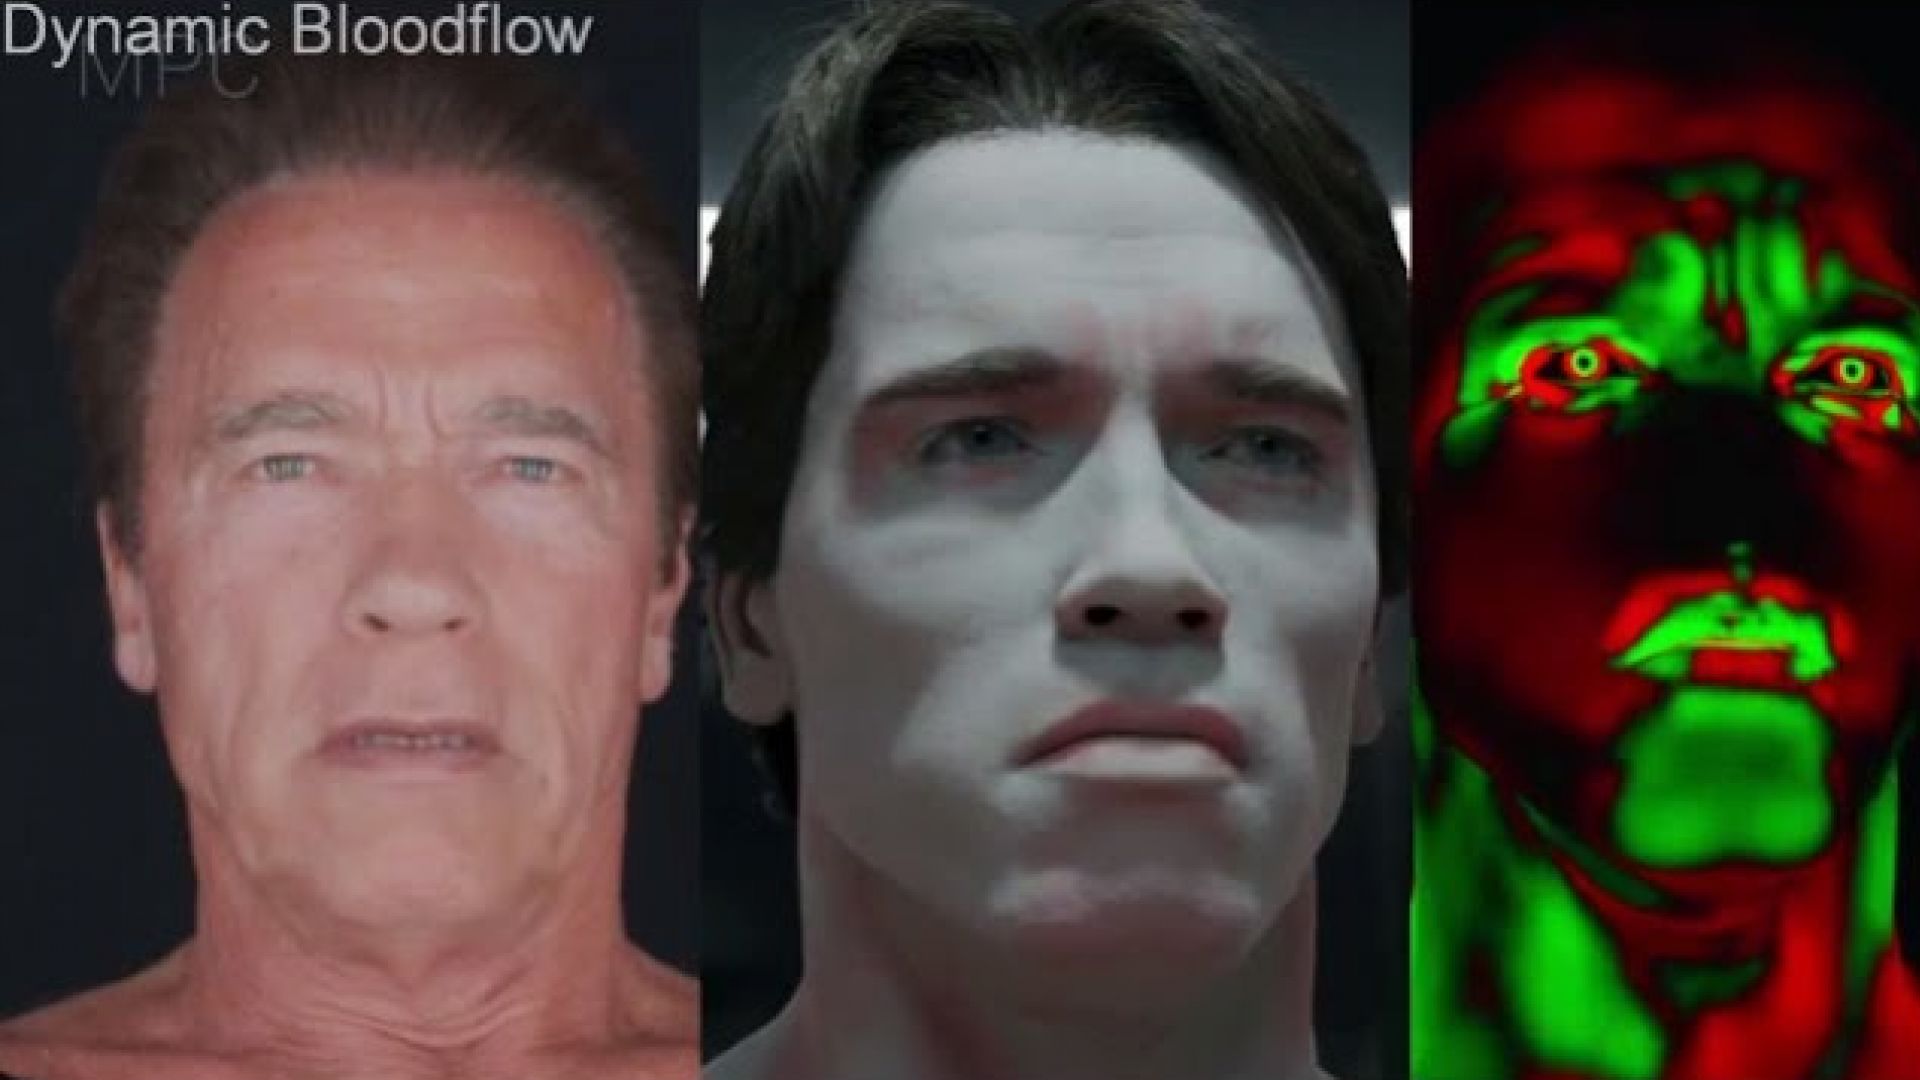 Explore How Visual Effects Artists Created a Digital Arnold 